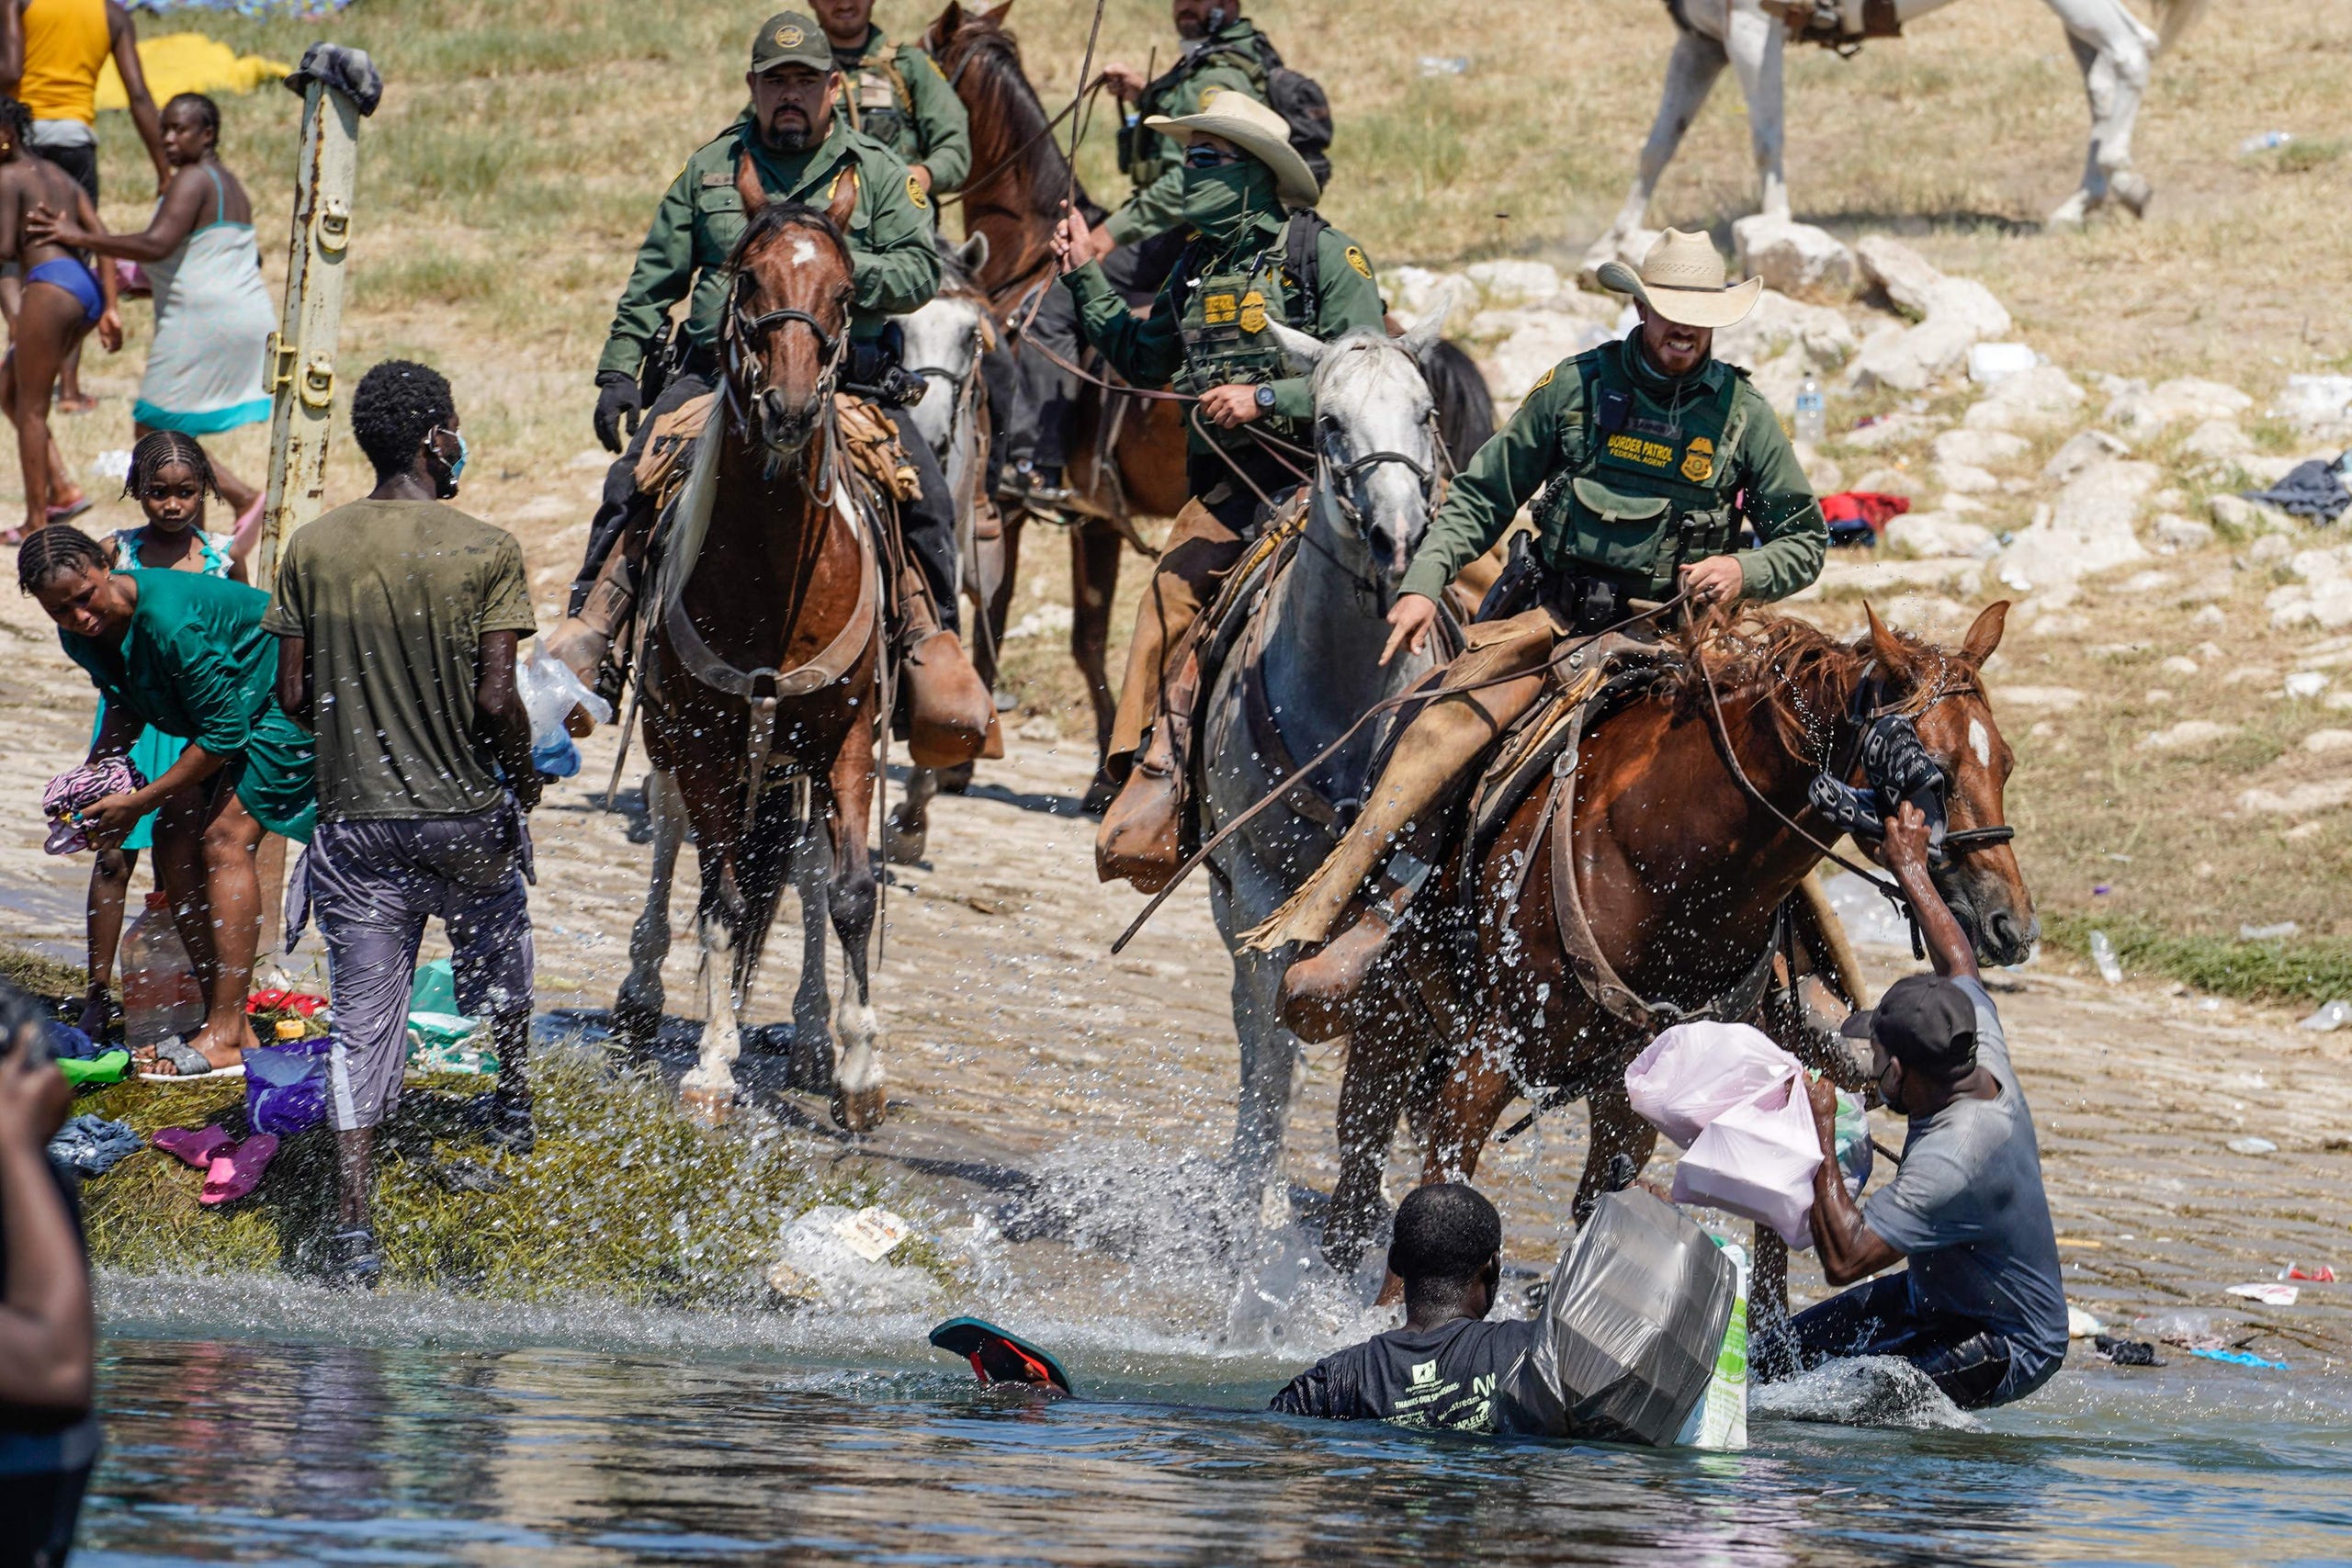 U.S. Customs and Border Patrol agents on horseback try to stop Haitian migrants from entering an encampment on the banks of the Rio Grande in Del Rio, Texas, on Sept. 19, 2021.